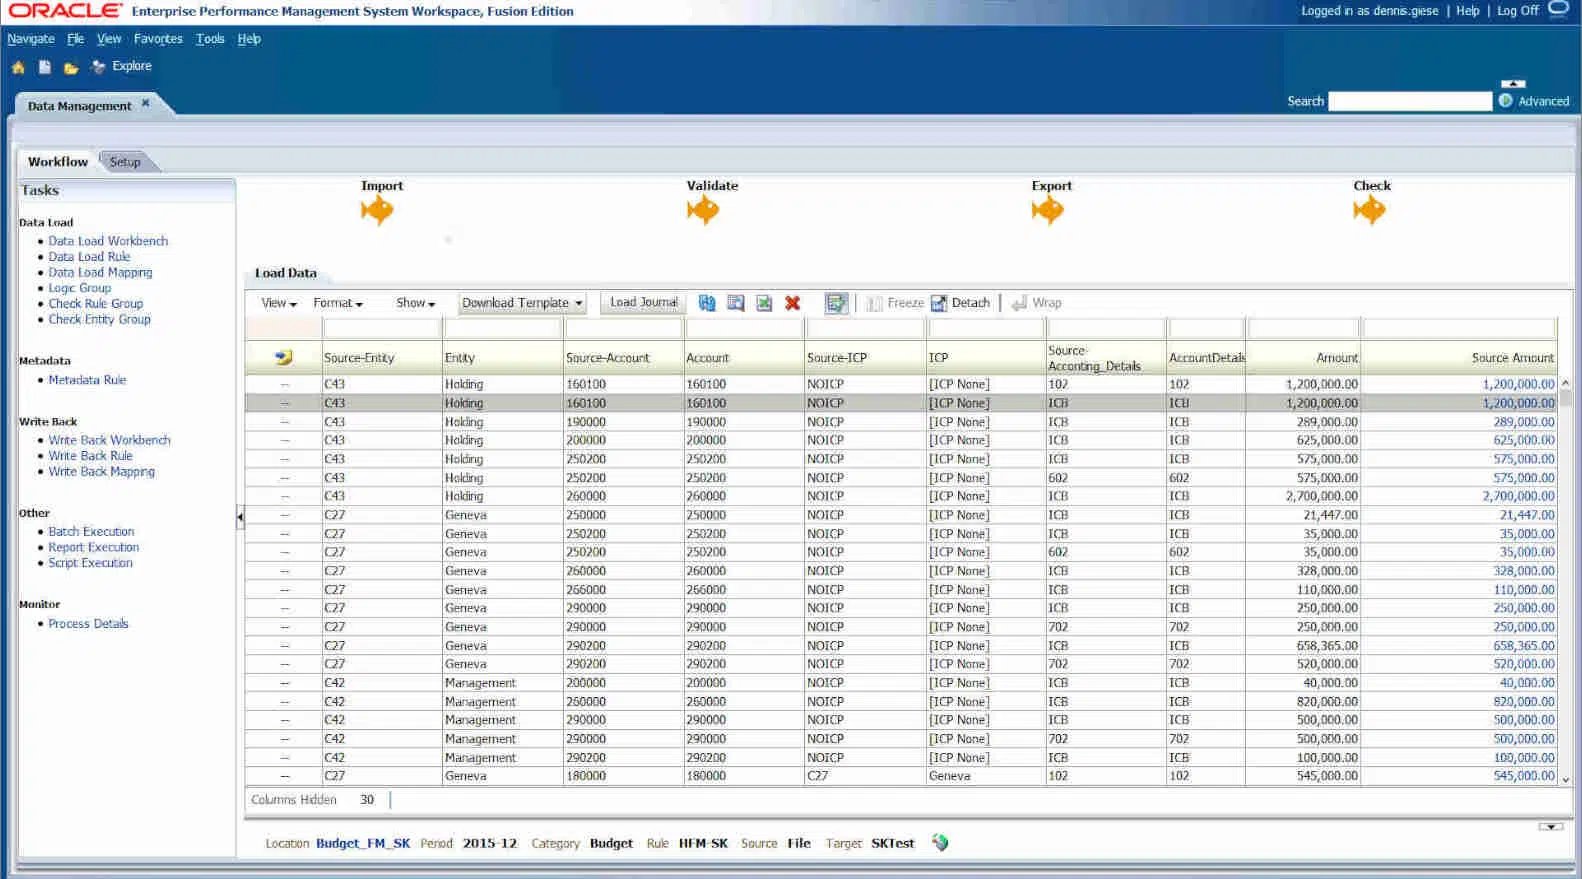 A screenshot of the Oracle Business Intelligence dashboard.